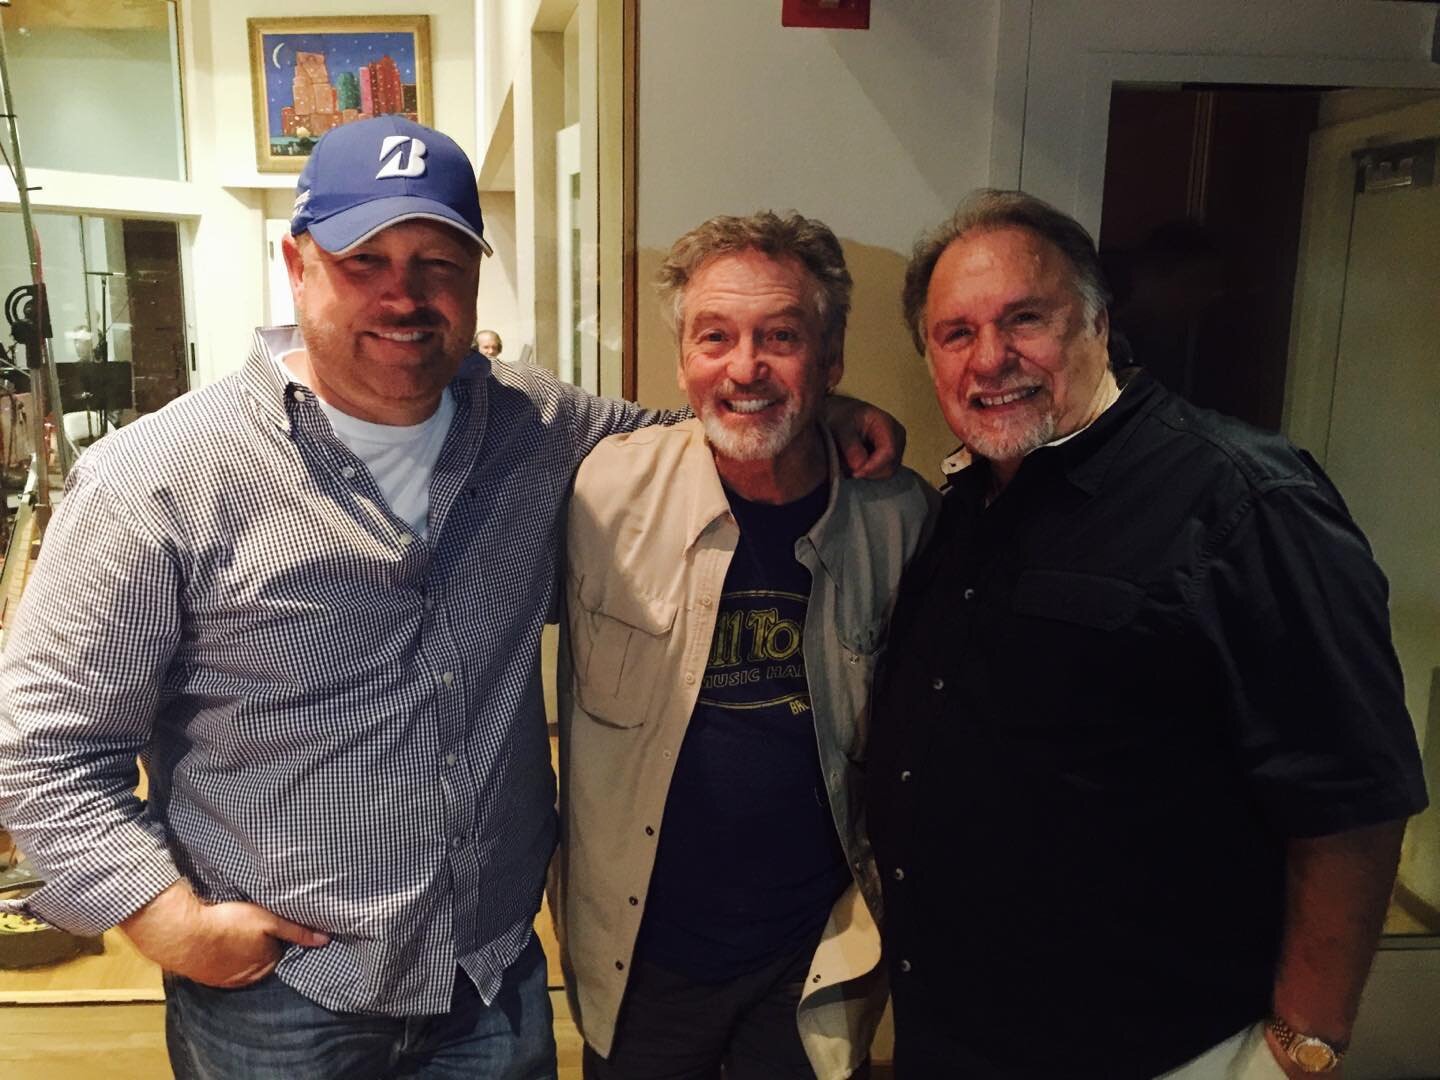 This popped up as a memory .. A few years back. Tracking with these legends Larry Gatlin and Gene Watson.